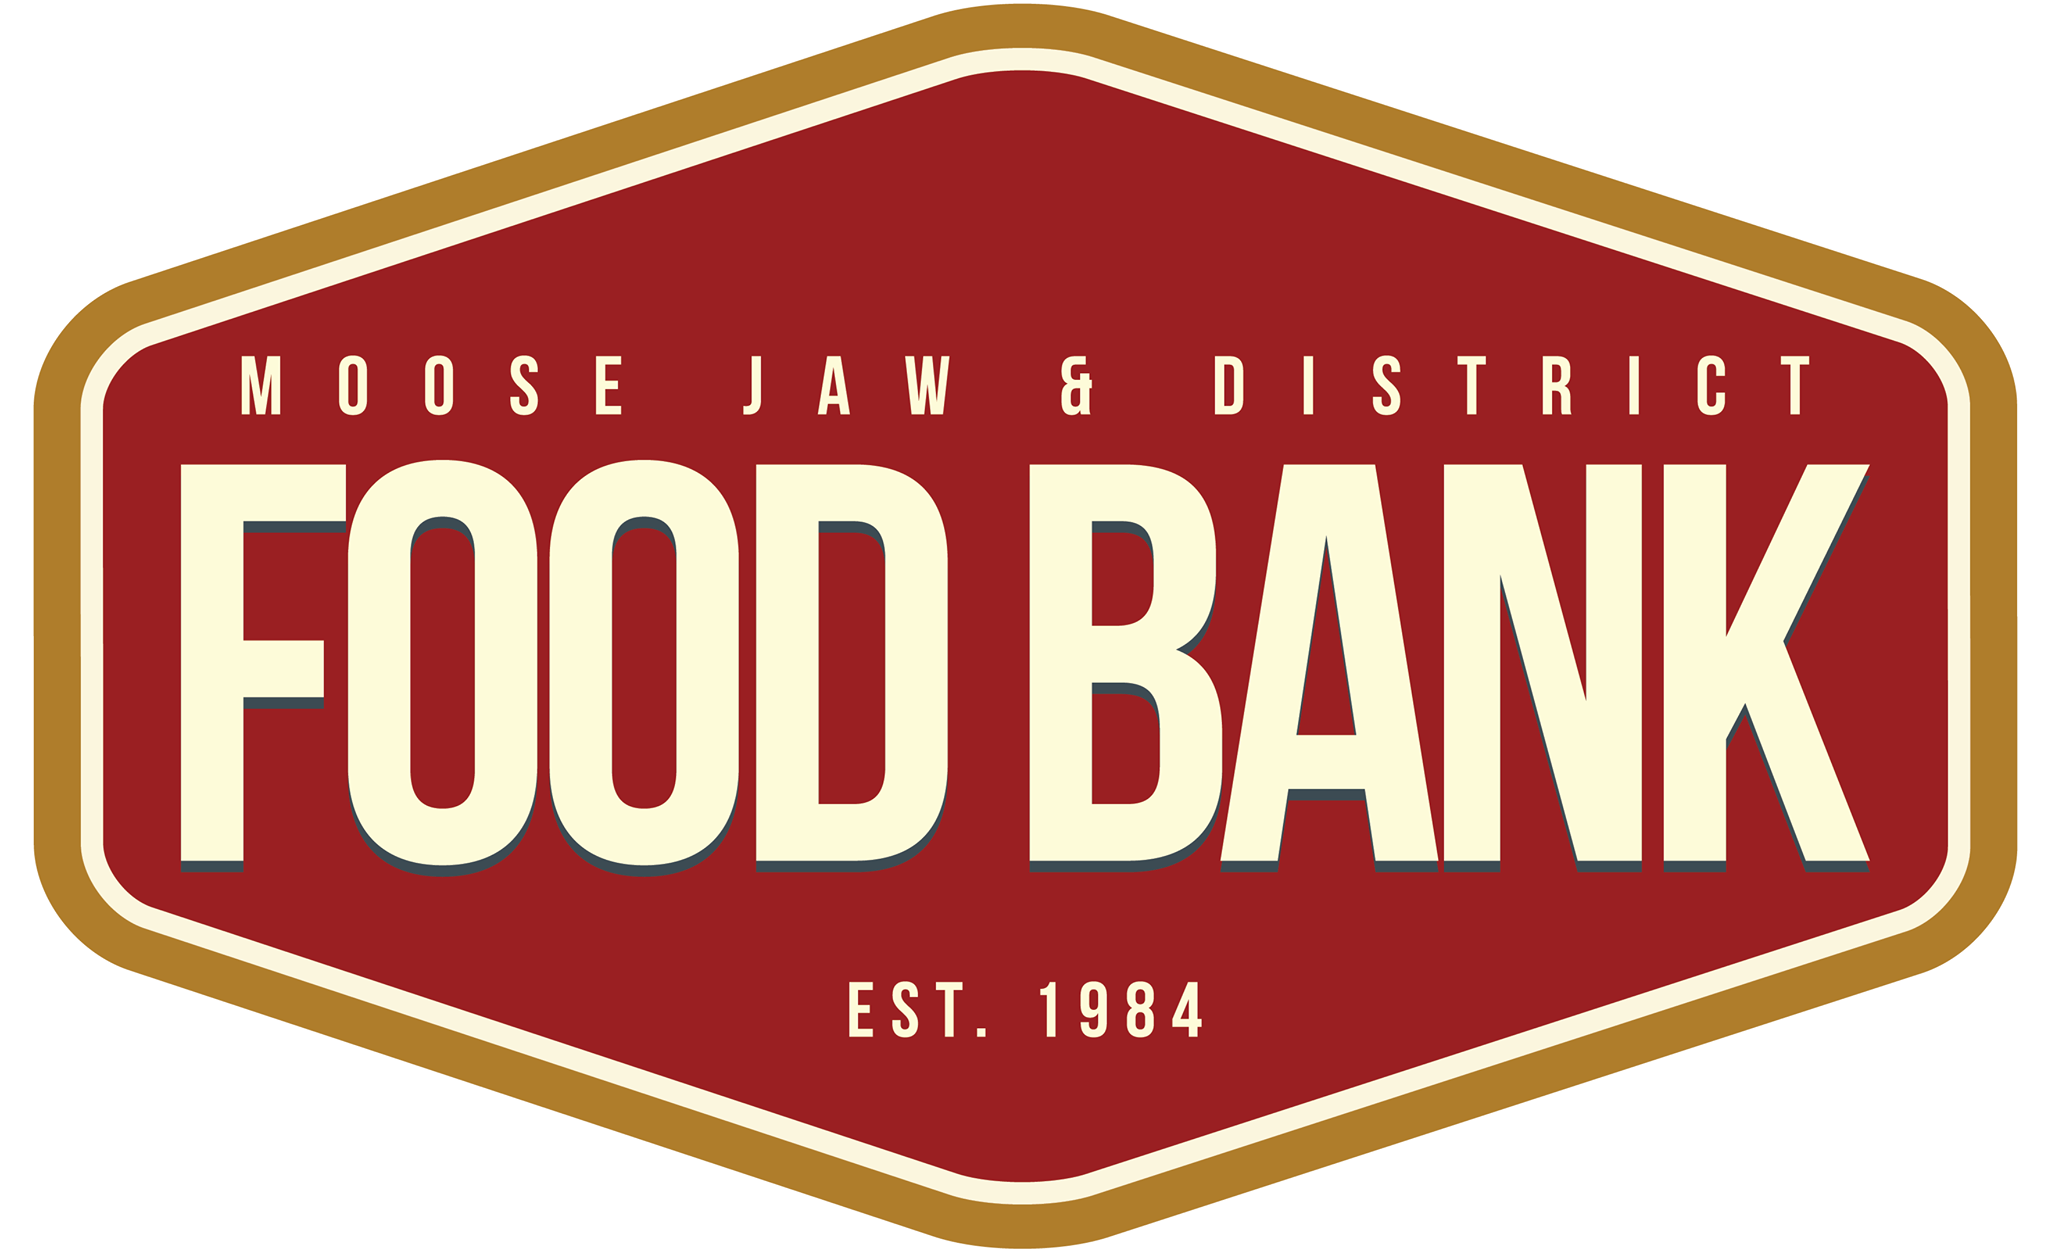 Moose Jaw and District Food Bank